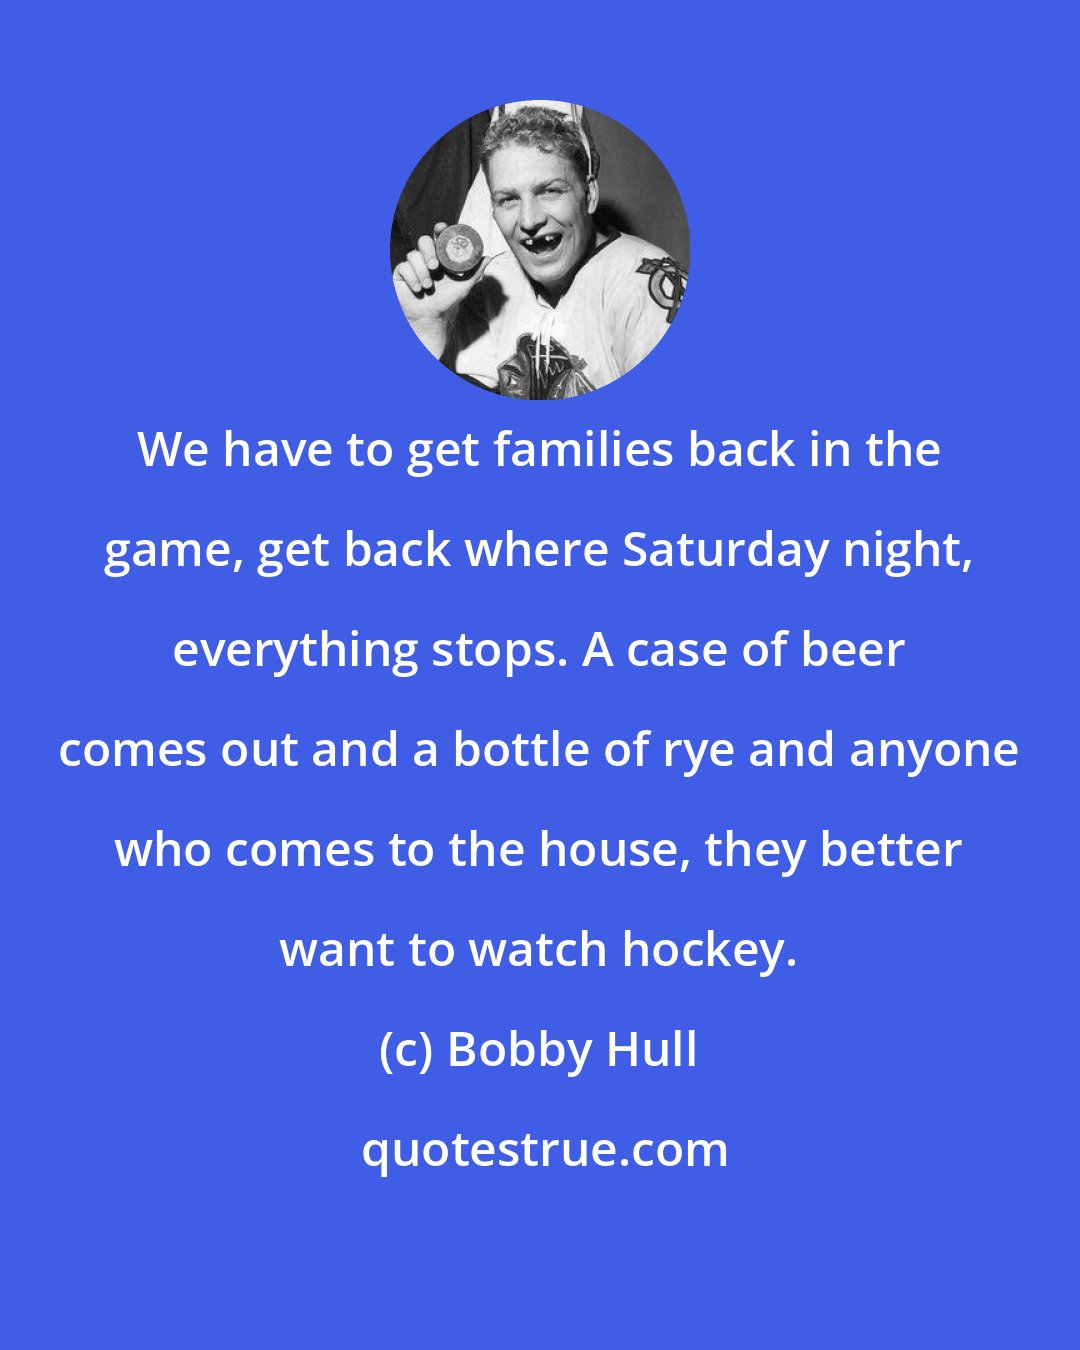 Bobby Hull: We have to get families back in the game, get back where Saturday night, everything stops. A case of beer comes out and a bottle of rye and anyone who comes to the house, they better want to watch hockey.